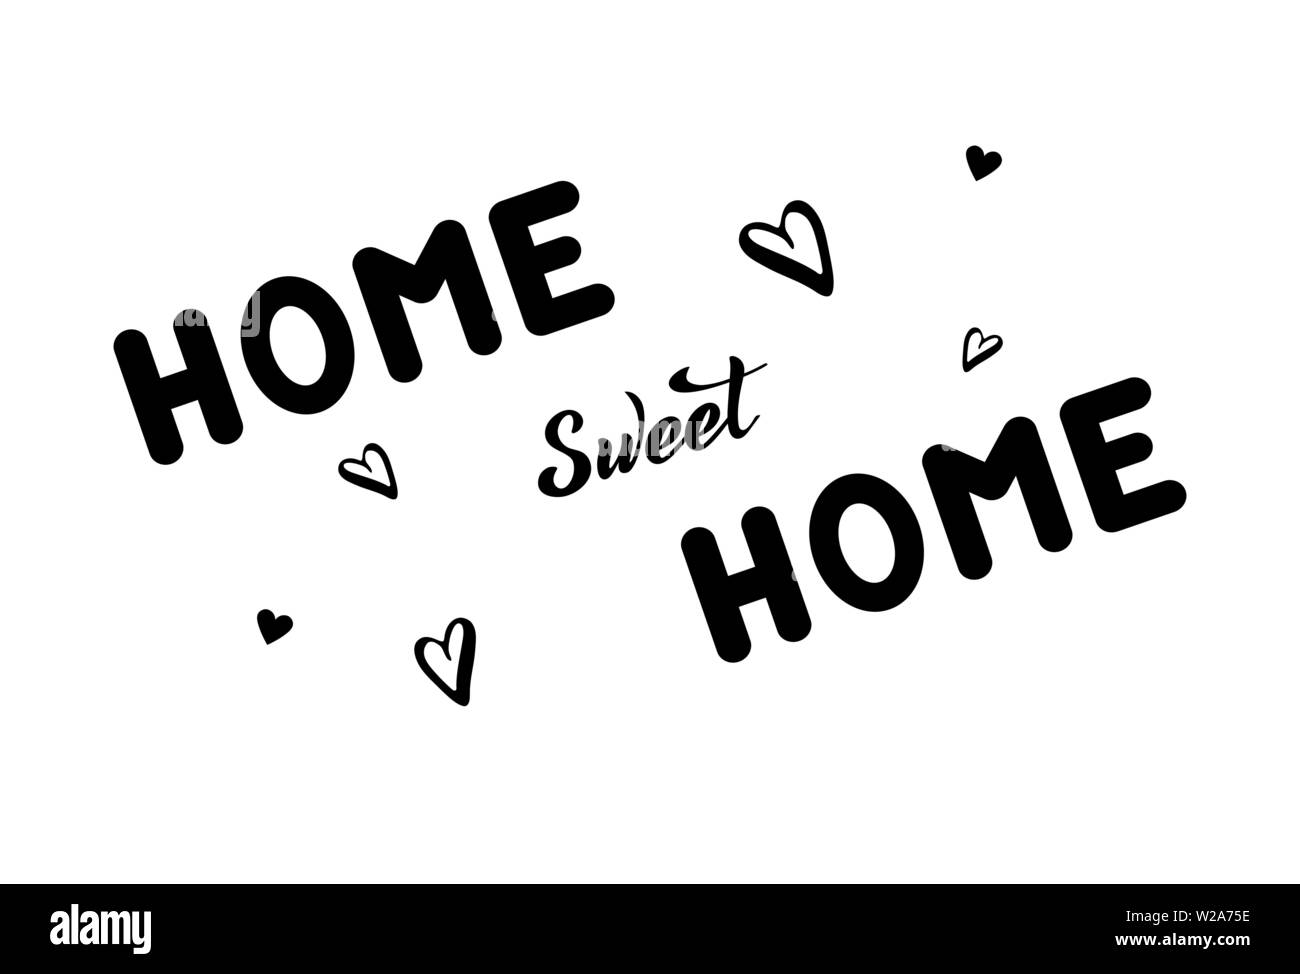 Vector illustration with handwritten phrase - Home sweet Home. Lettering. Black text with hearts on a white background. Isolated word. For web site, c Stock Vector